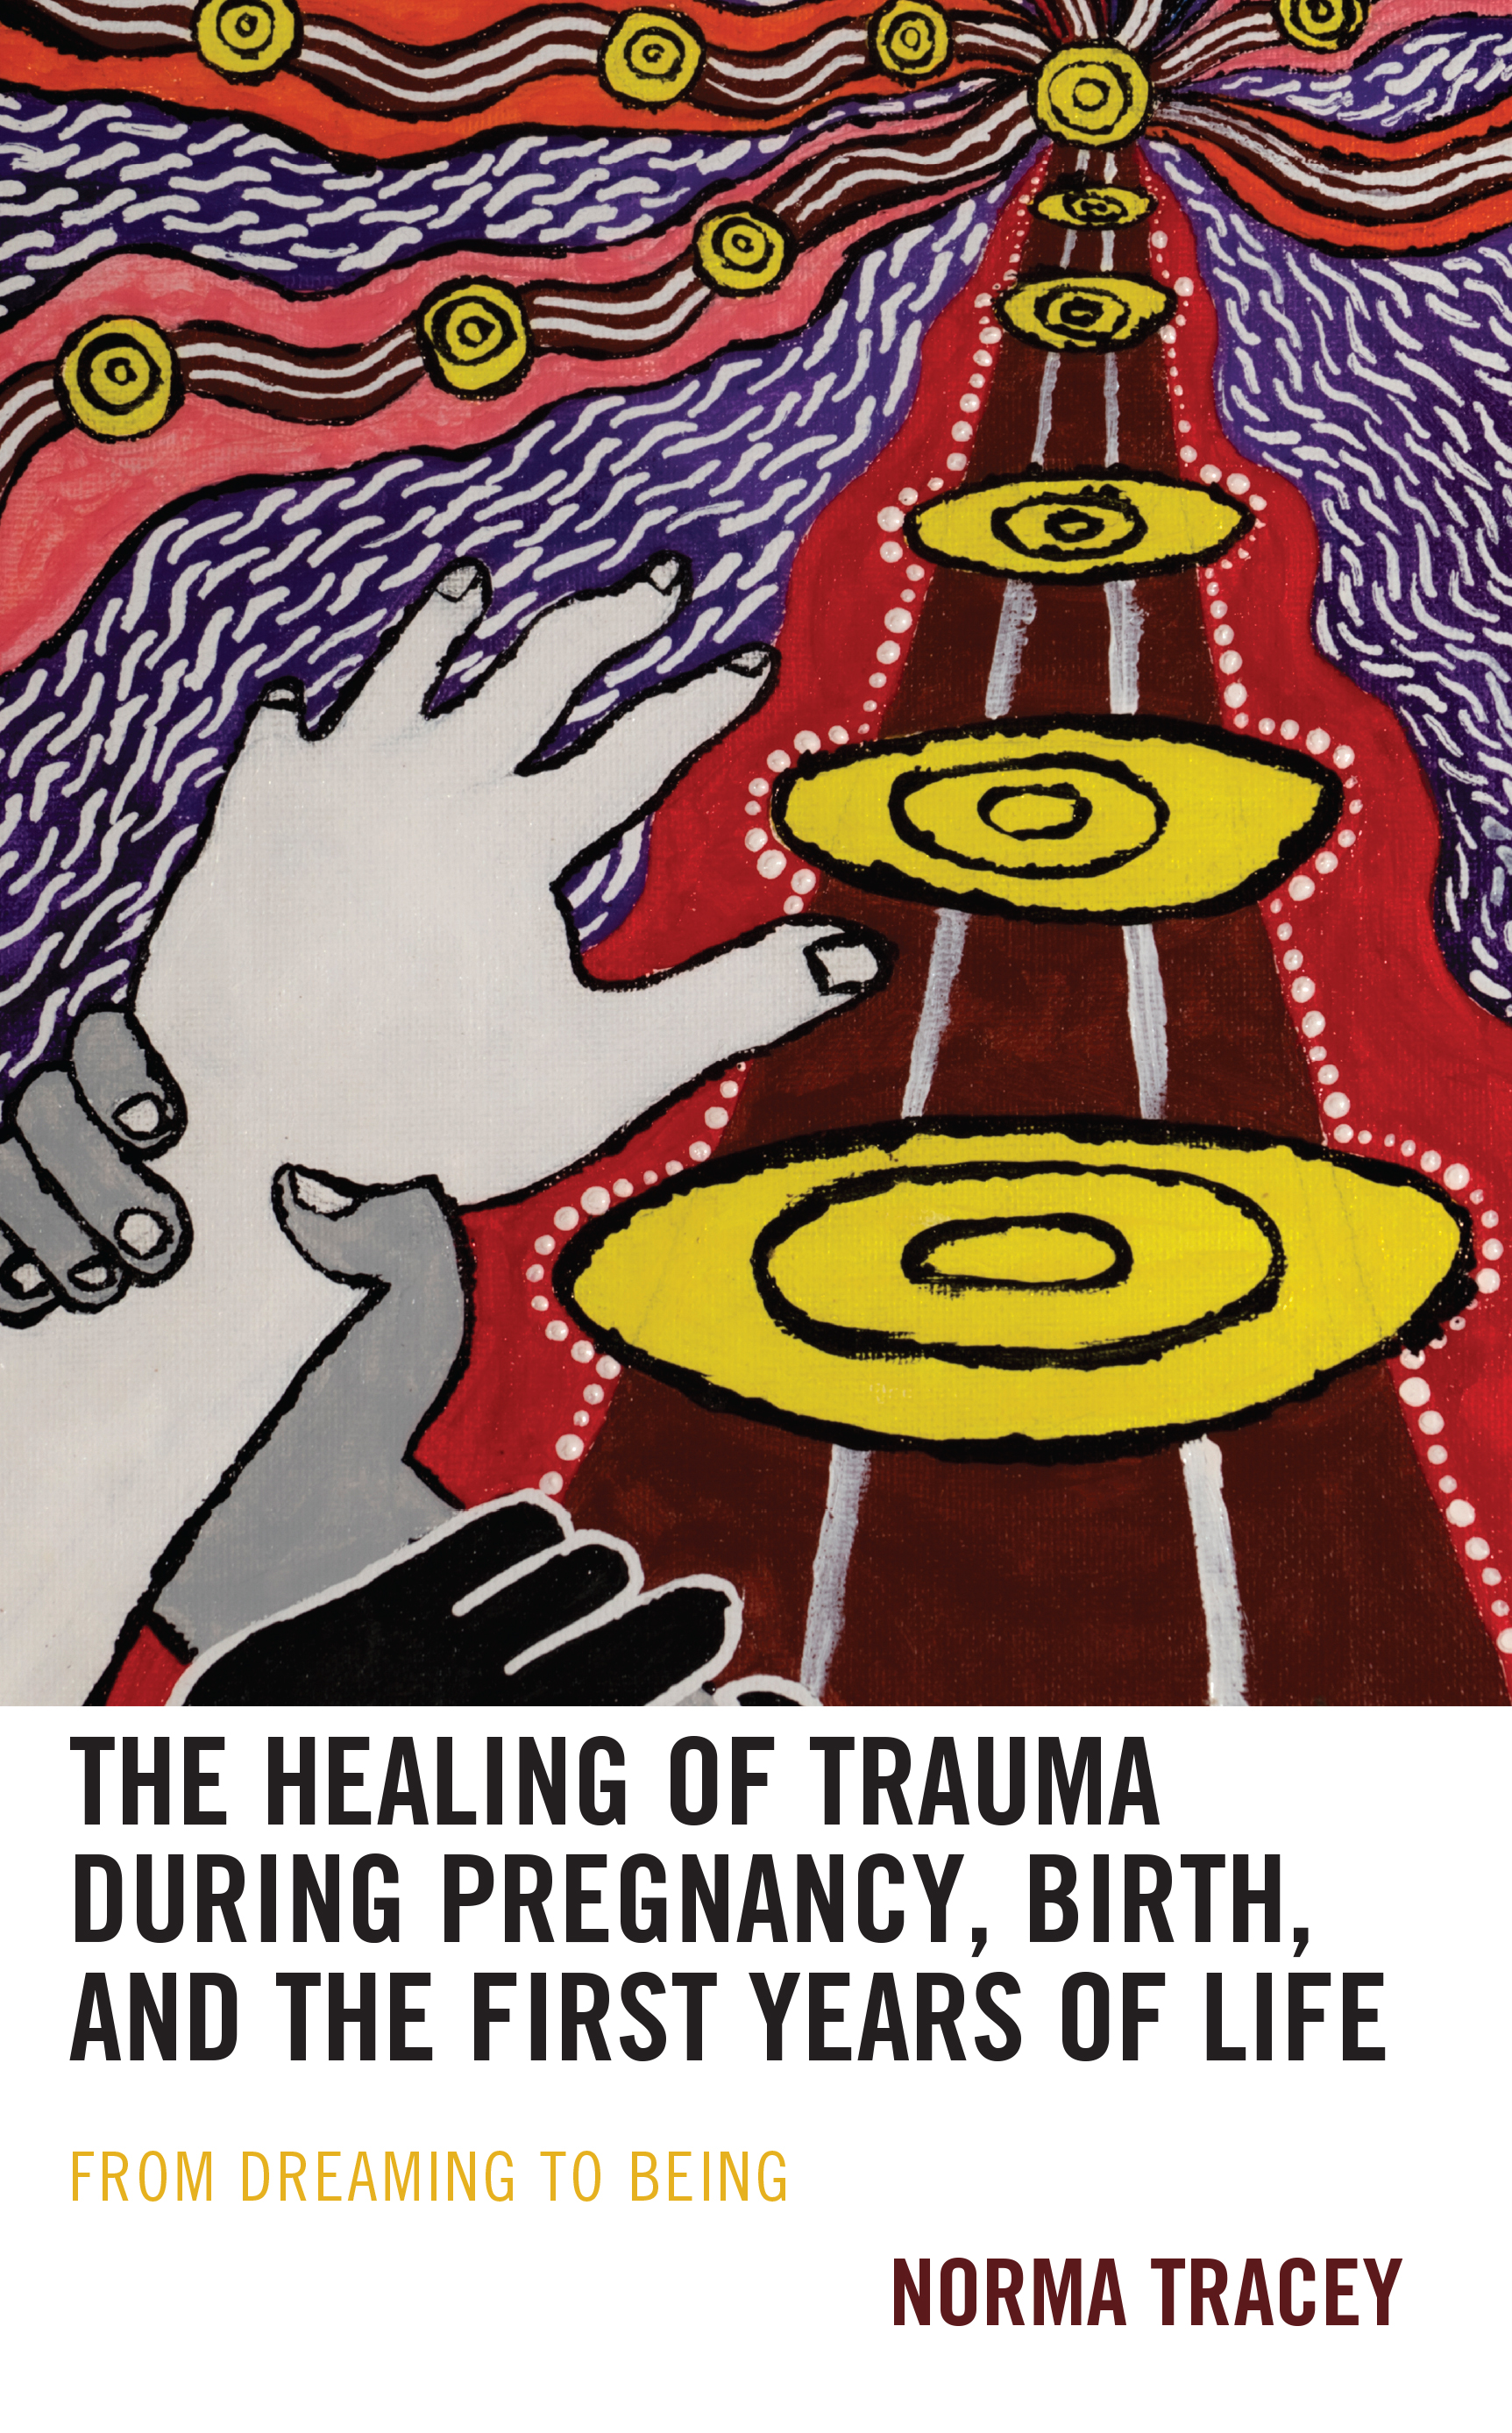 The Healing of Trauma during Pregnancy, Birth, and the First Years of Life: From Dreaming to Being